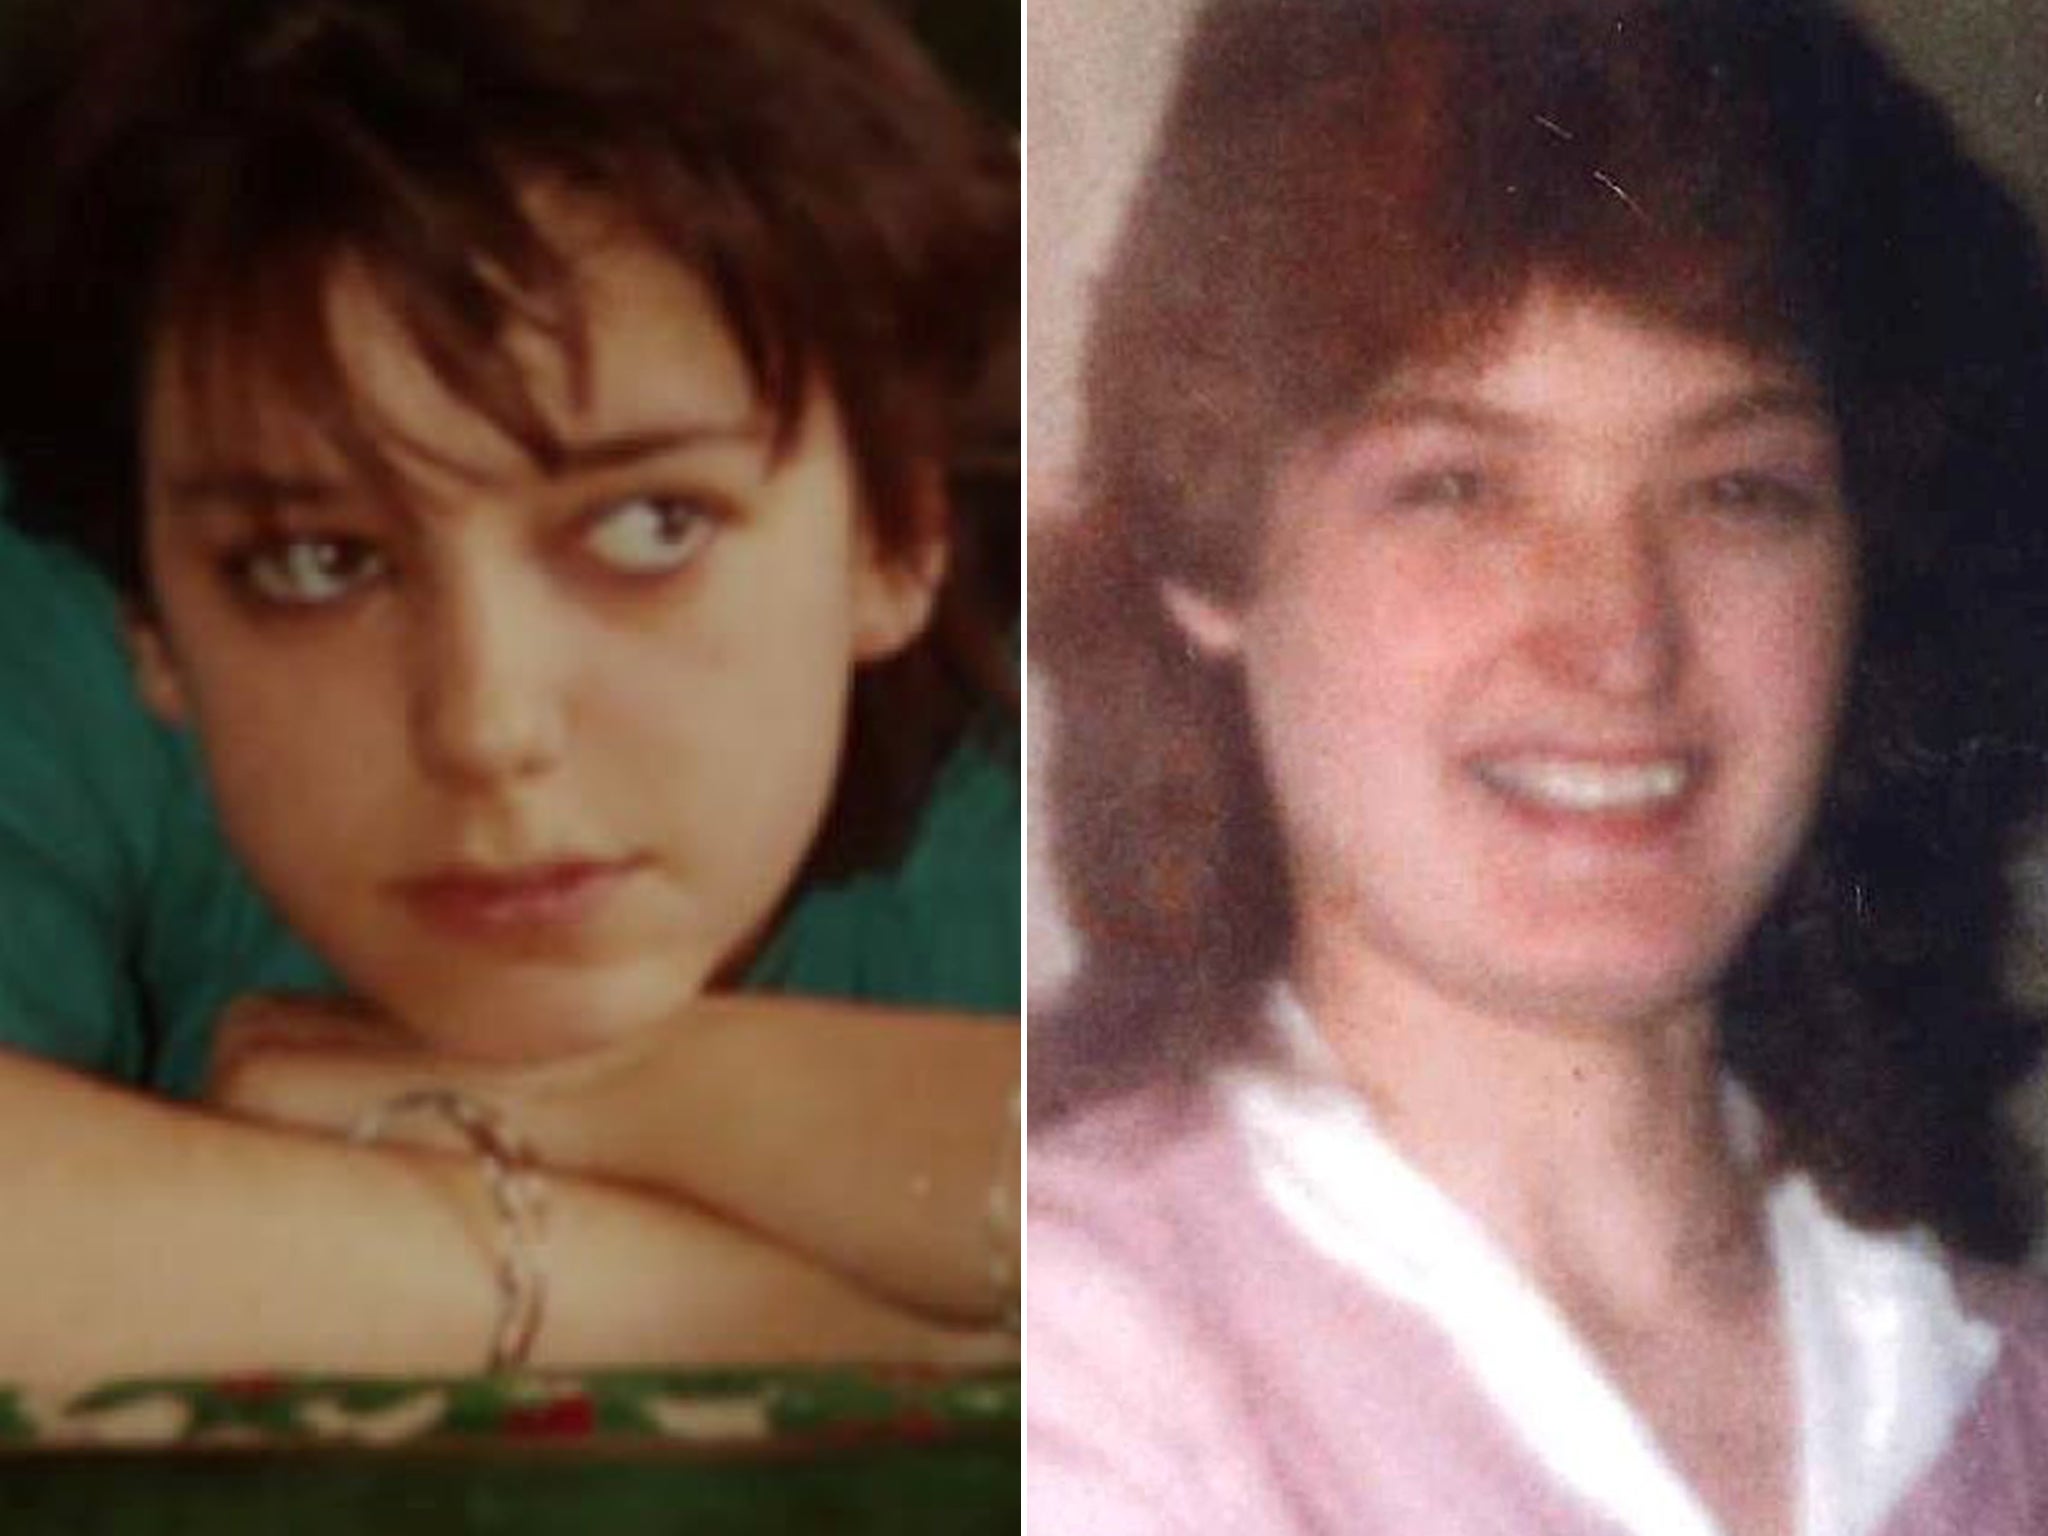 The murders of Caroline Pierce, left, and Wendy Knell remained a mystery for decades